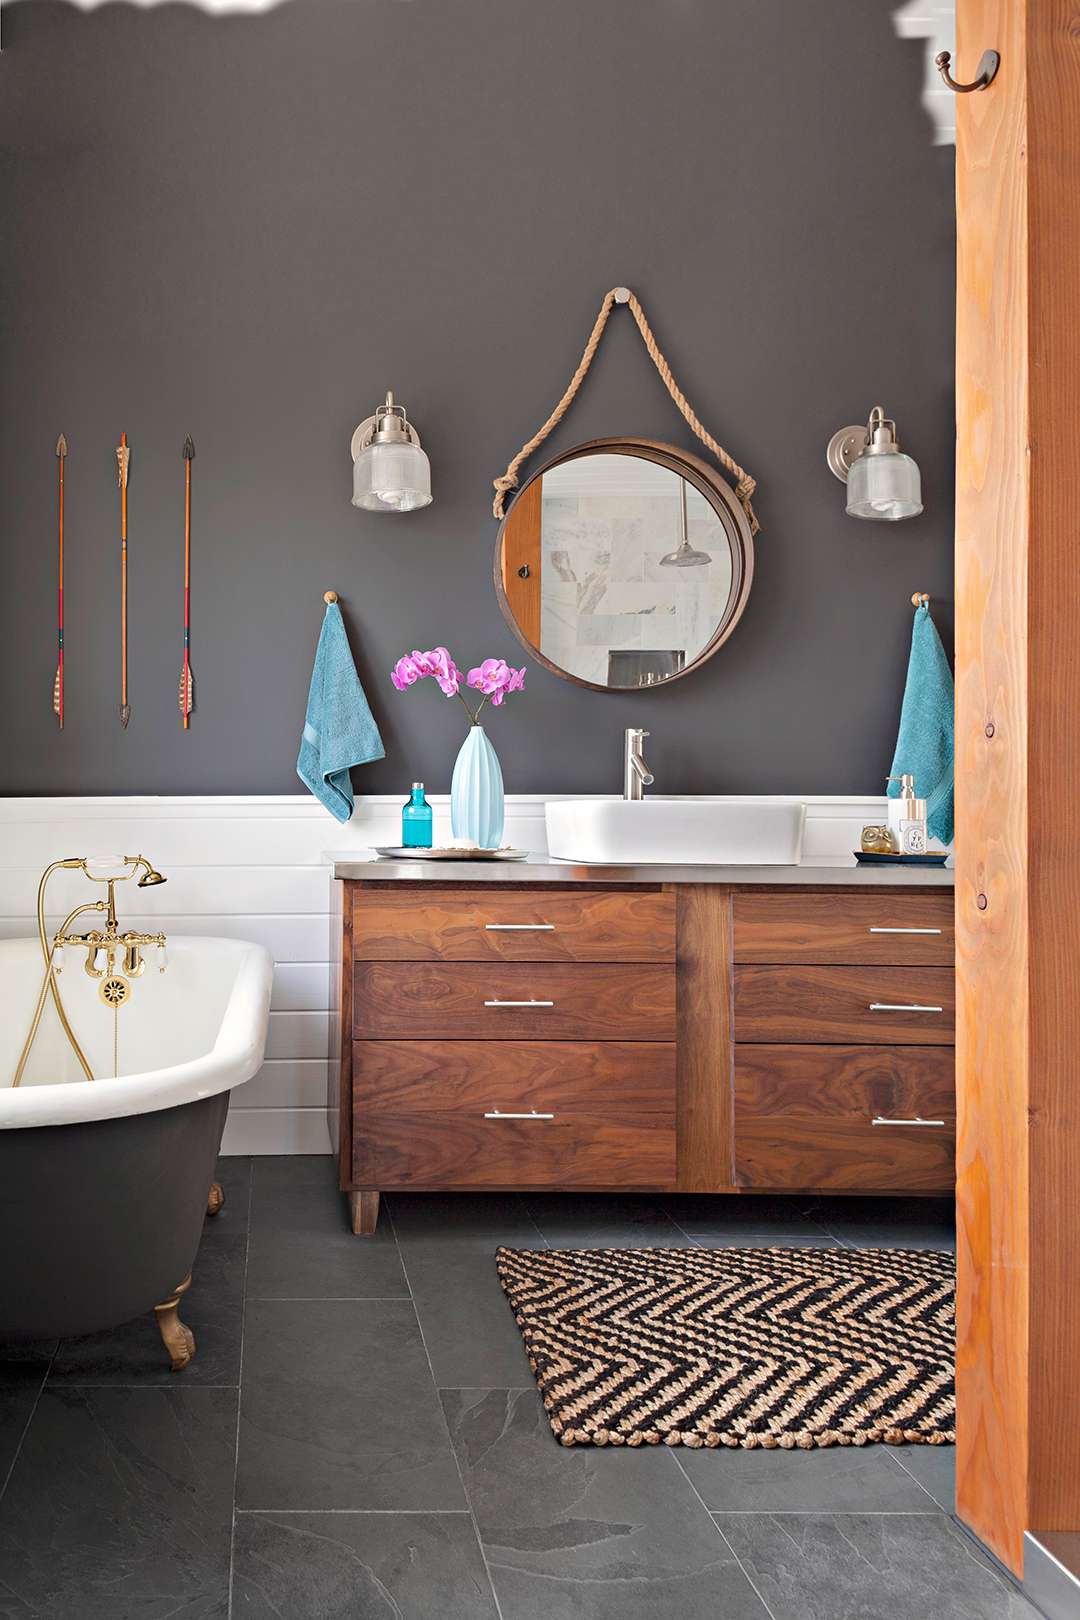 charcoal colored walls and floor tiles with wooden vanity